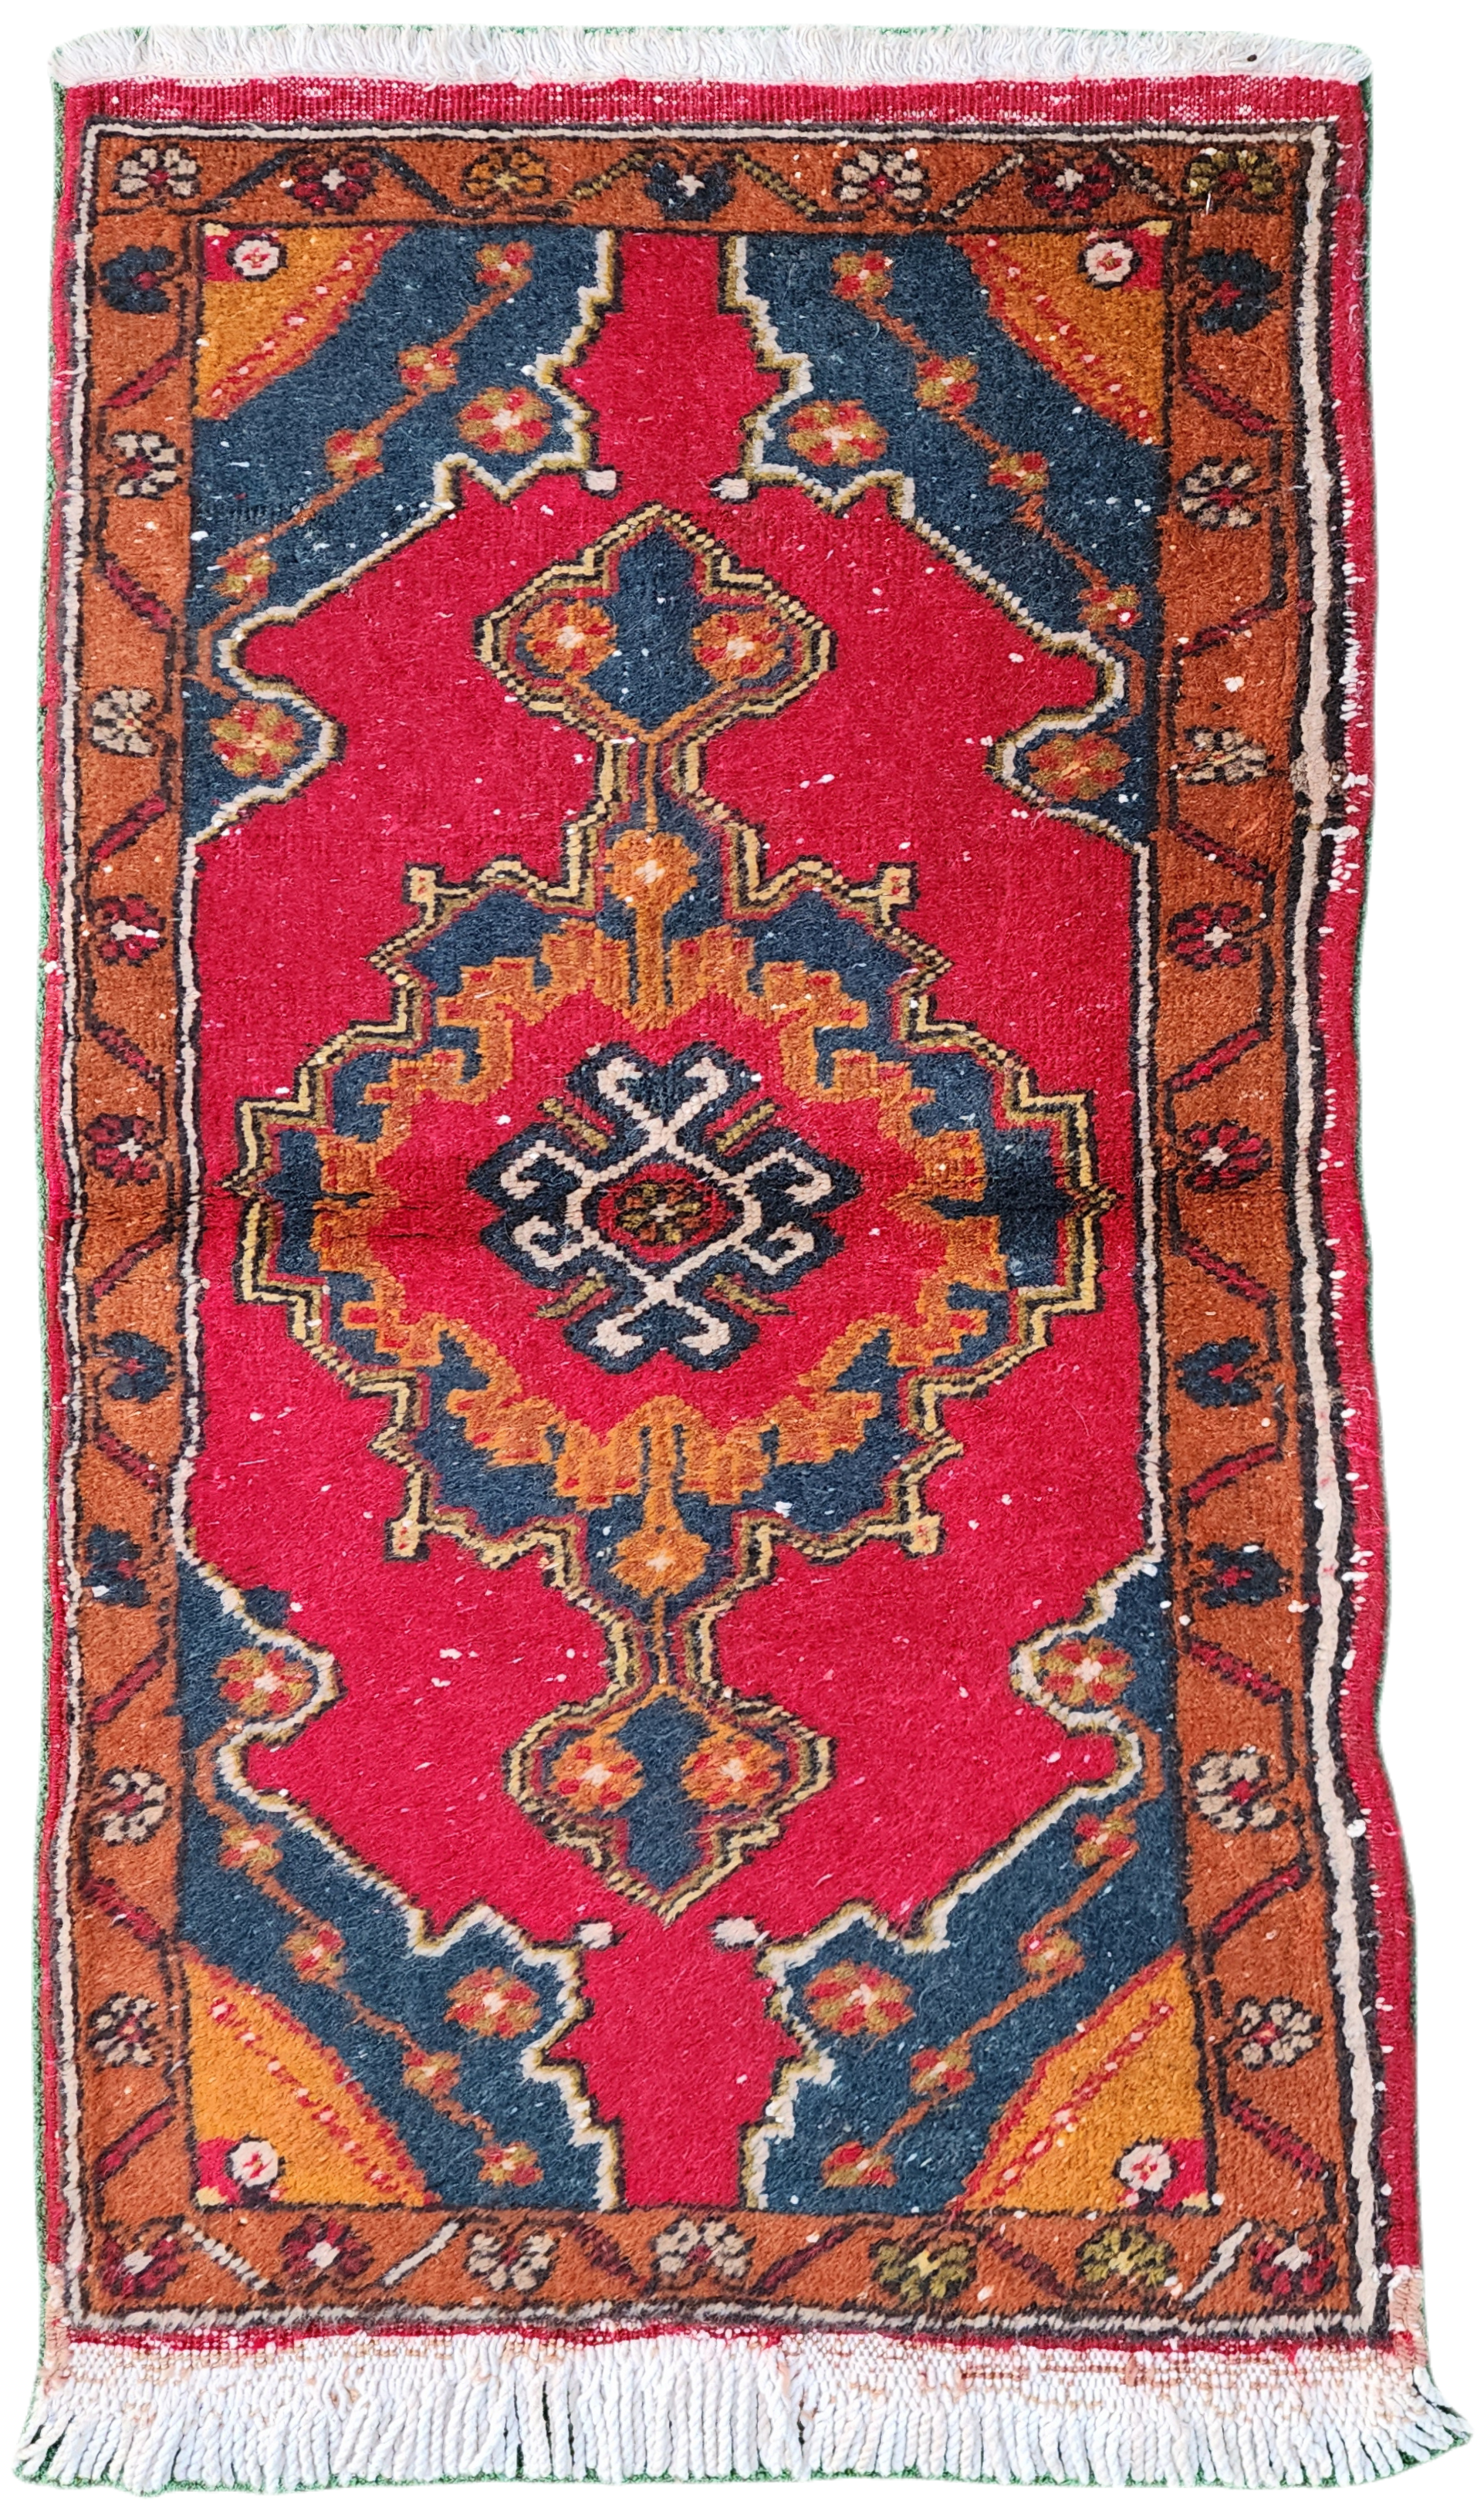 Copy of Red, Blue and Orange Turkish Rug 2'8'' x1'6''